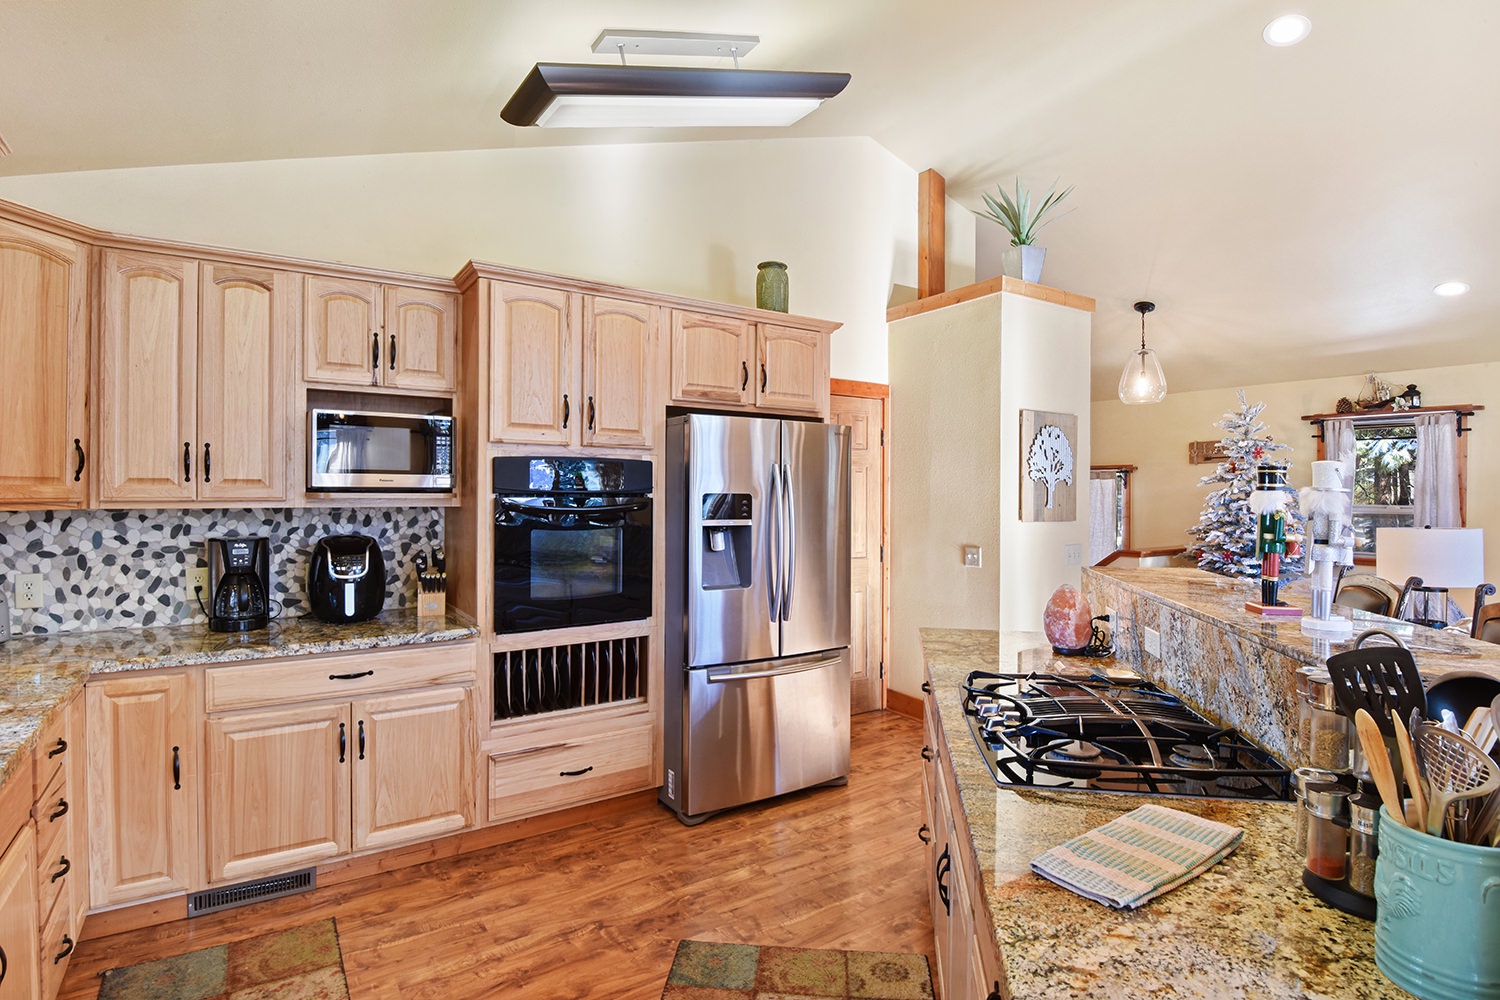 Full kitchen with coffee maker, toaster, are fryer, and more!